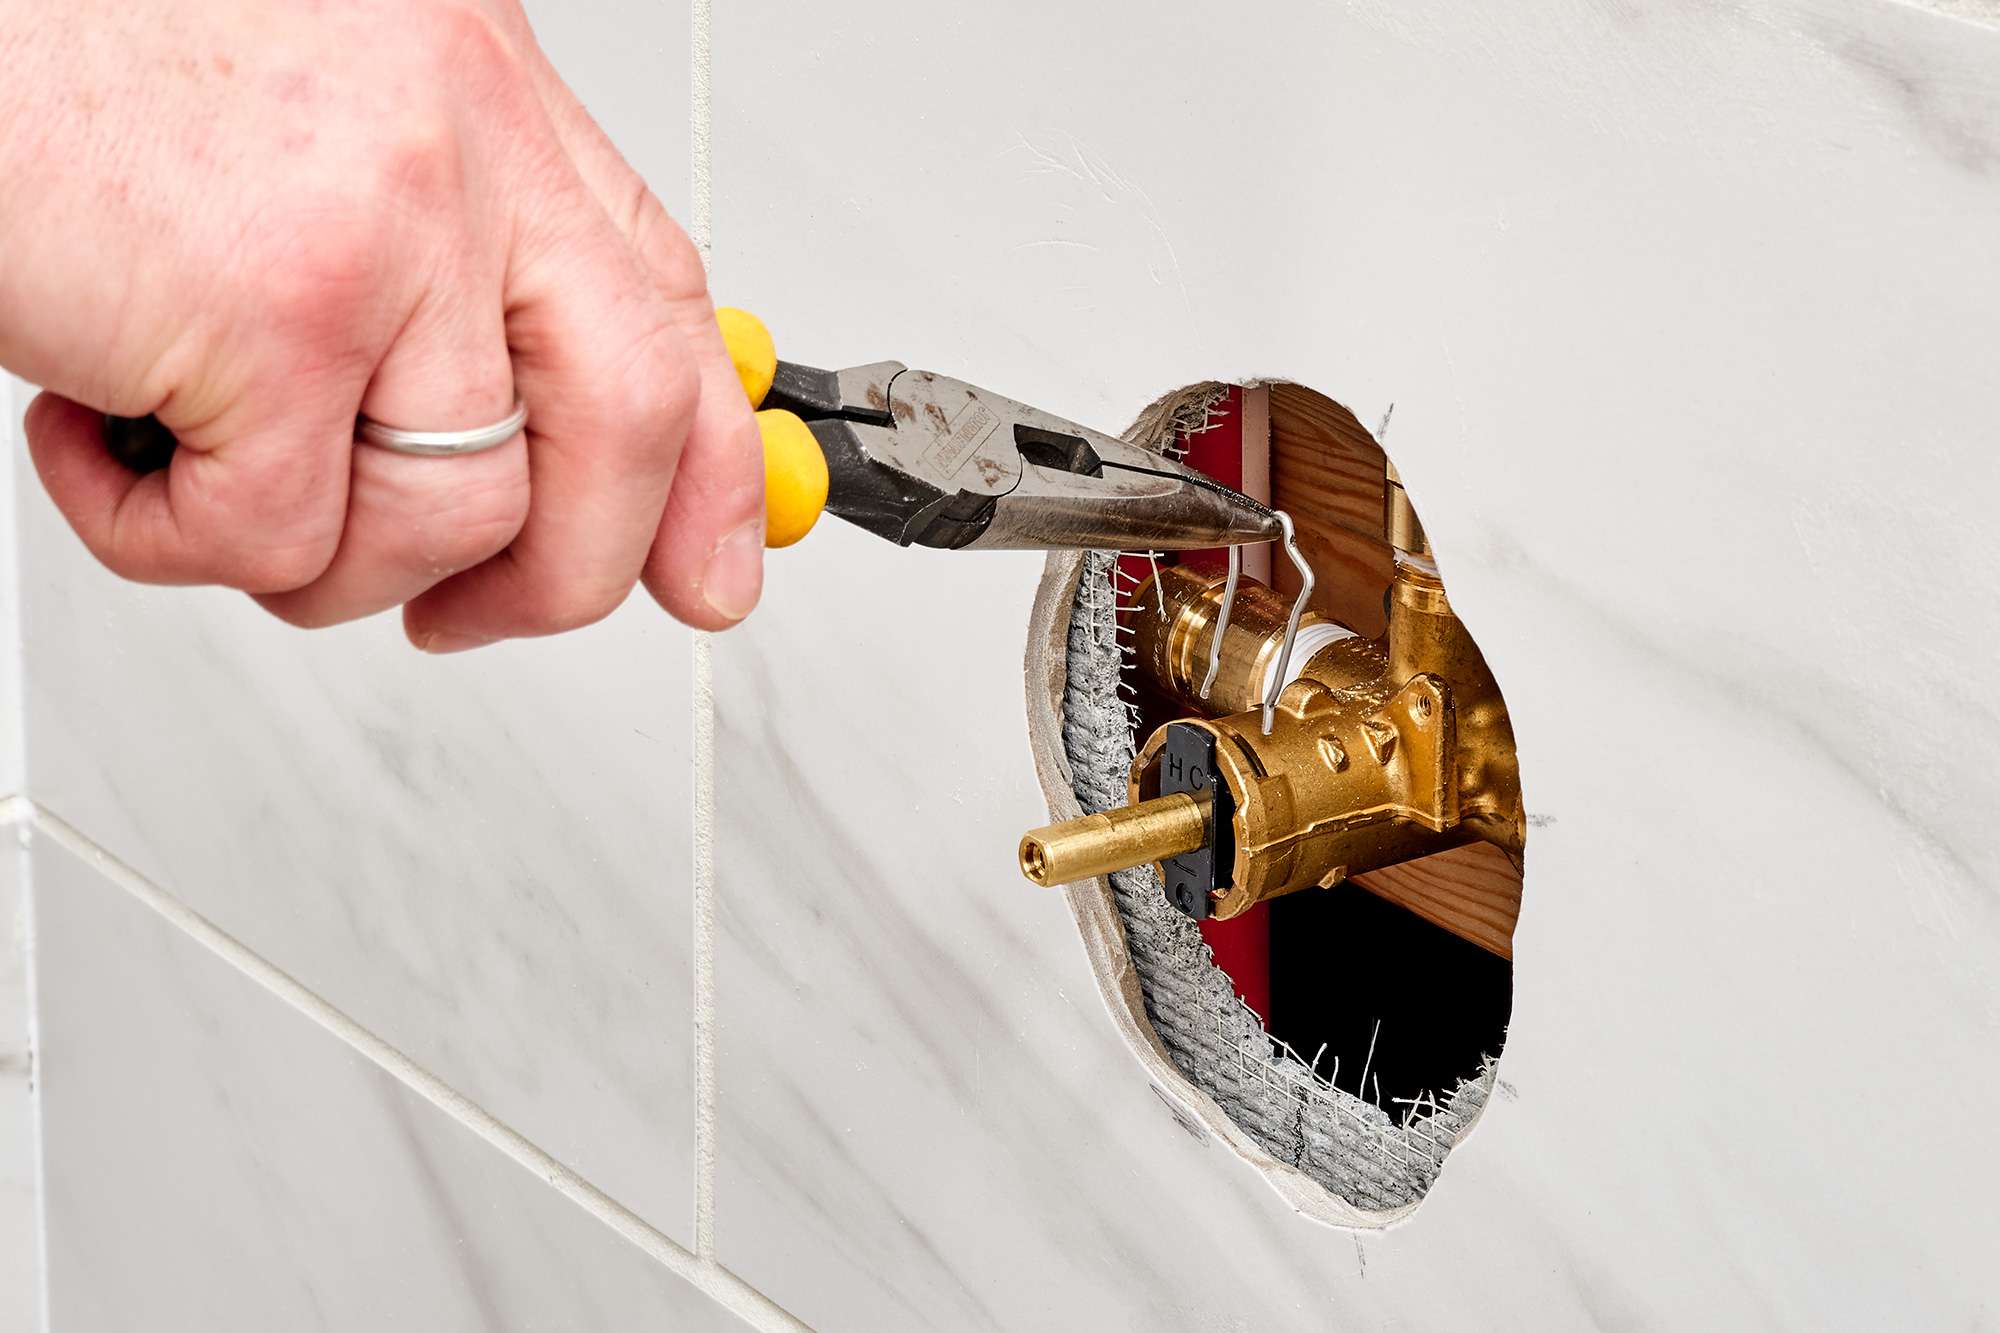 How To Replace A Faulty Thermostatic Shower Valve Cartridge: The 10 Step Guide